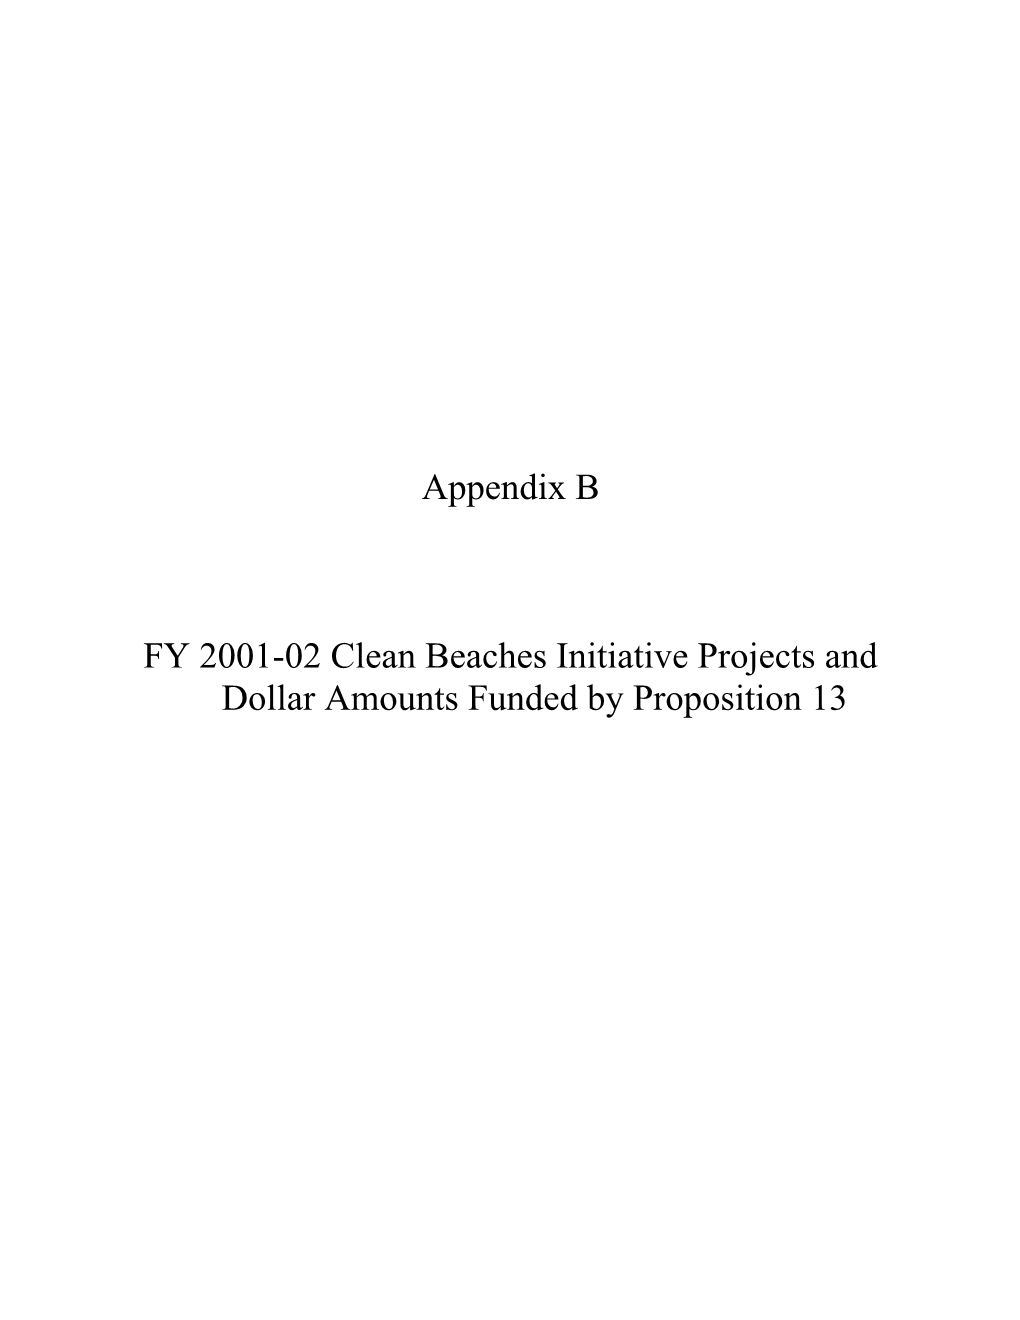 FY 2001-02 Clean Beaches Initiative Projects and Dollar Amounts Funded by Proposition 13